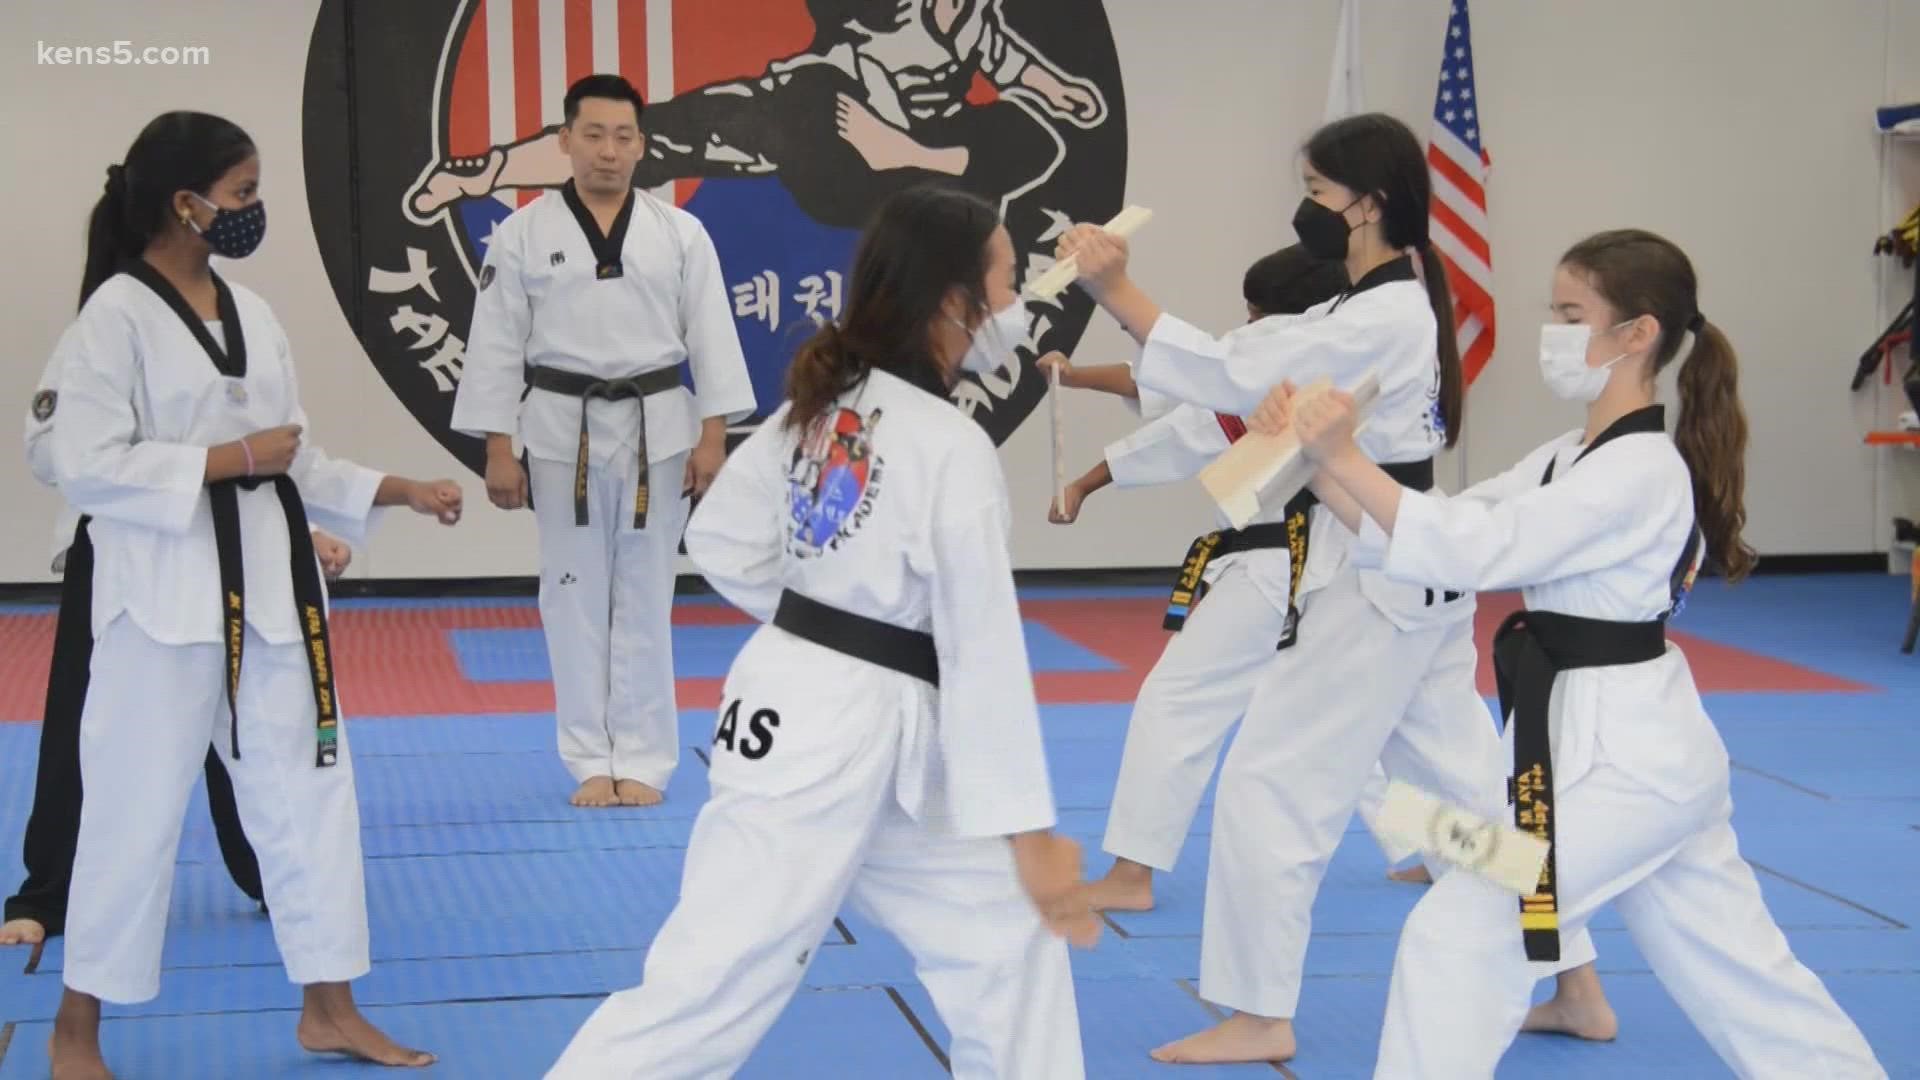 If you’re looking for a fun way to exercise outside of a conventional gym, consider giving taekwondo a try! It’s an art of self-defense that originated in Korea.